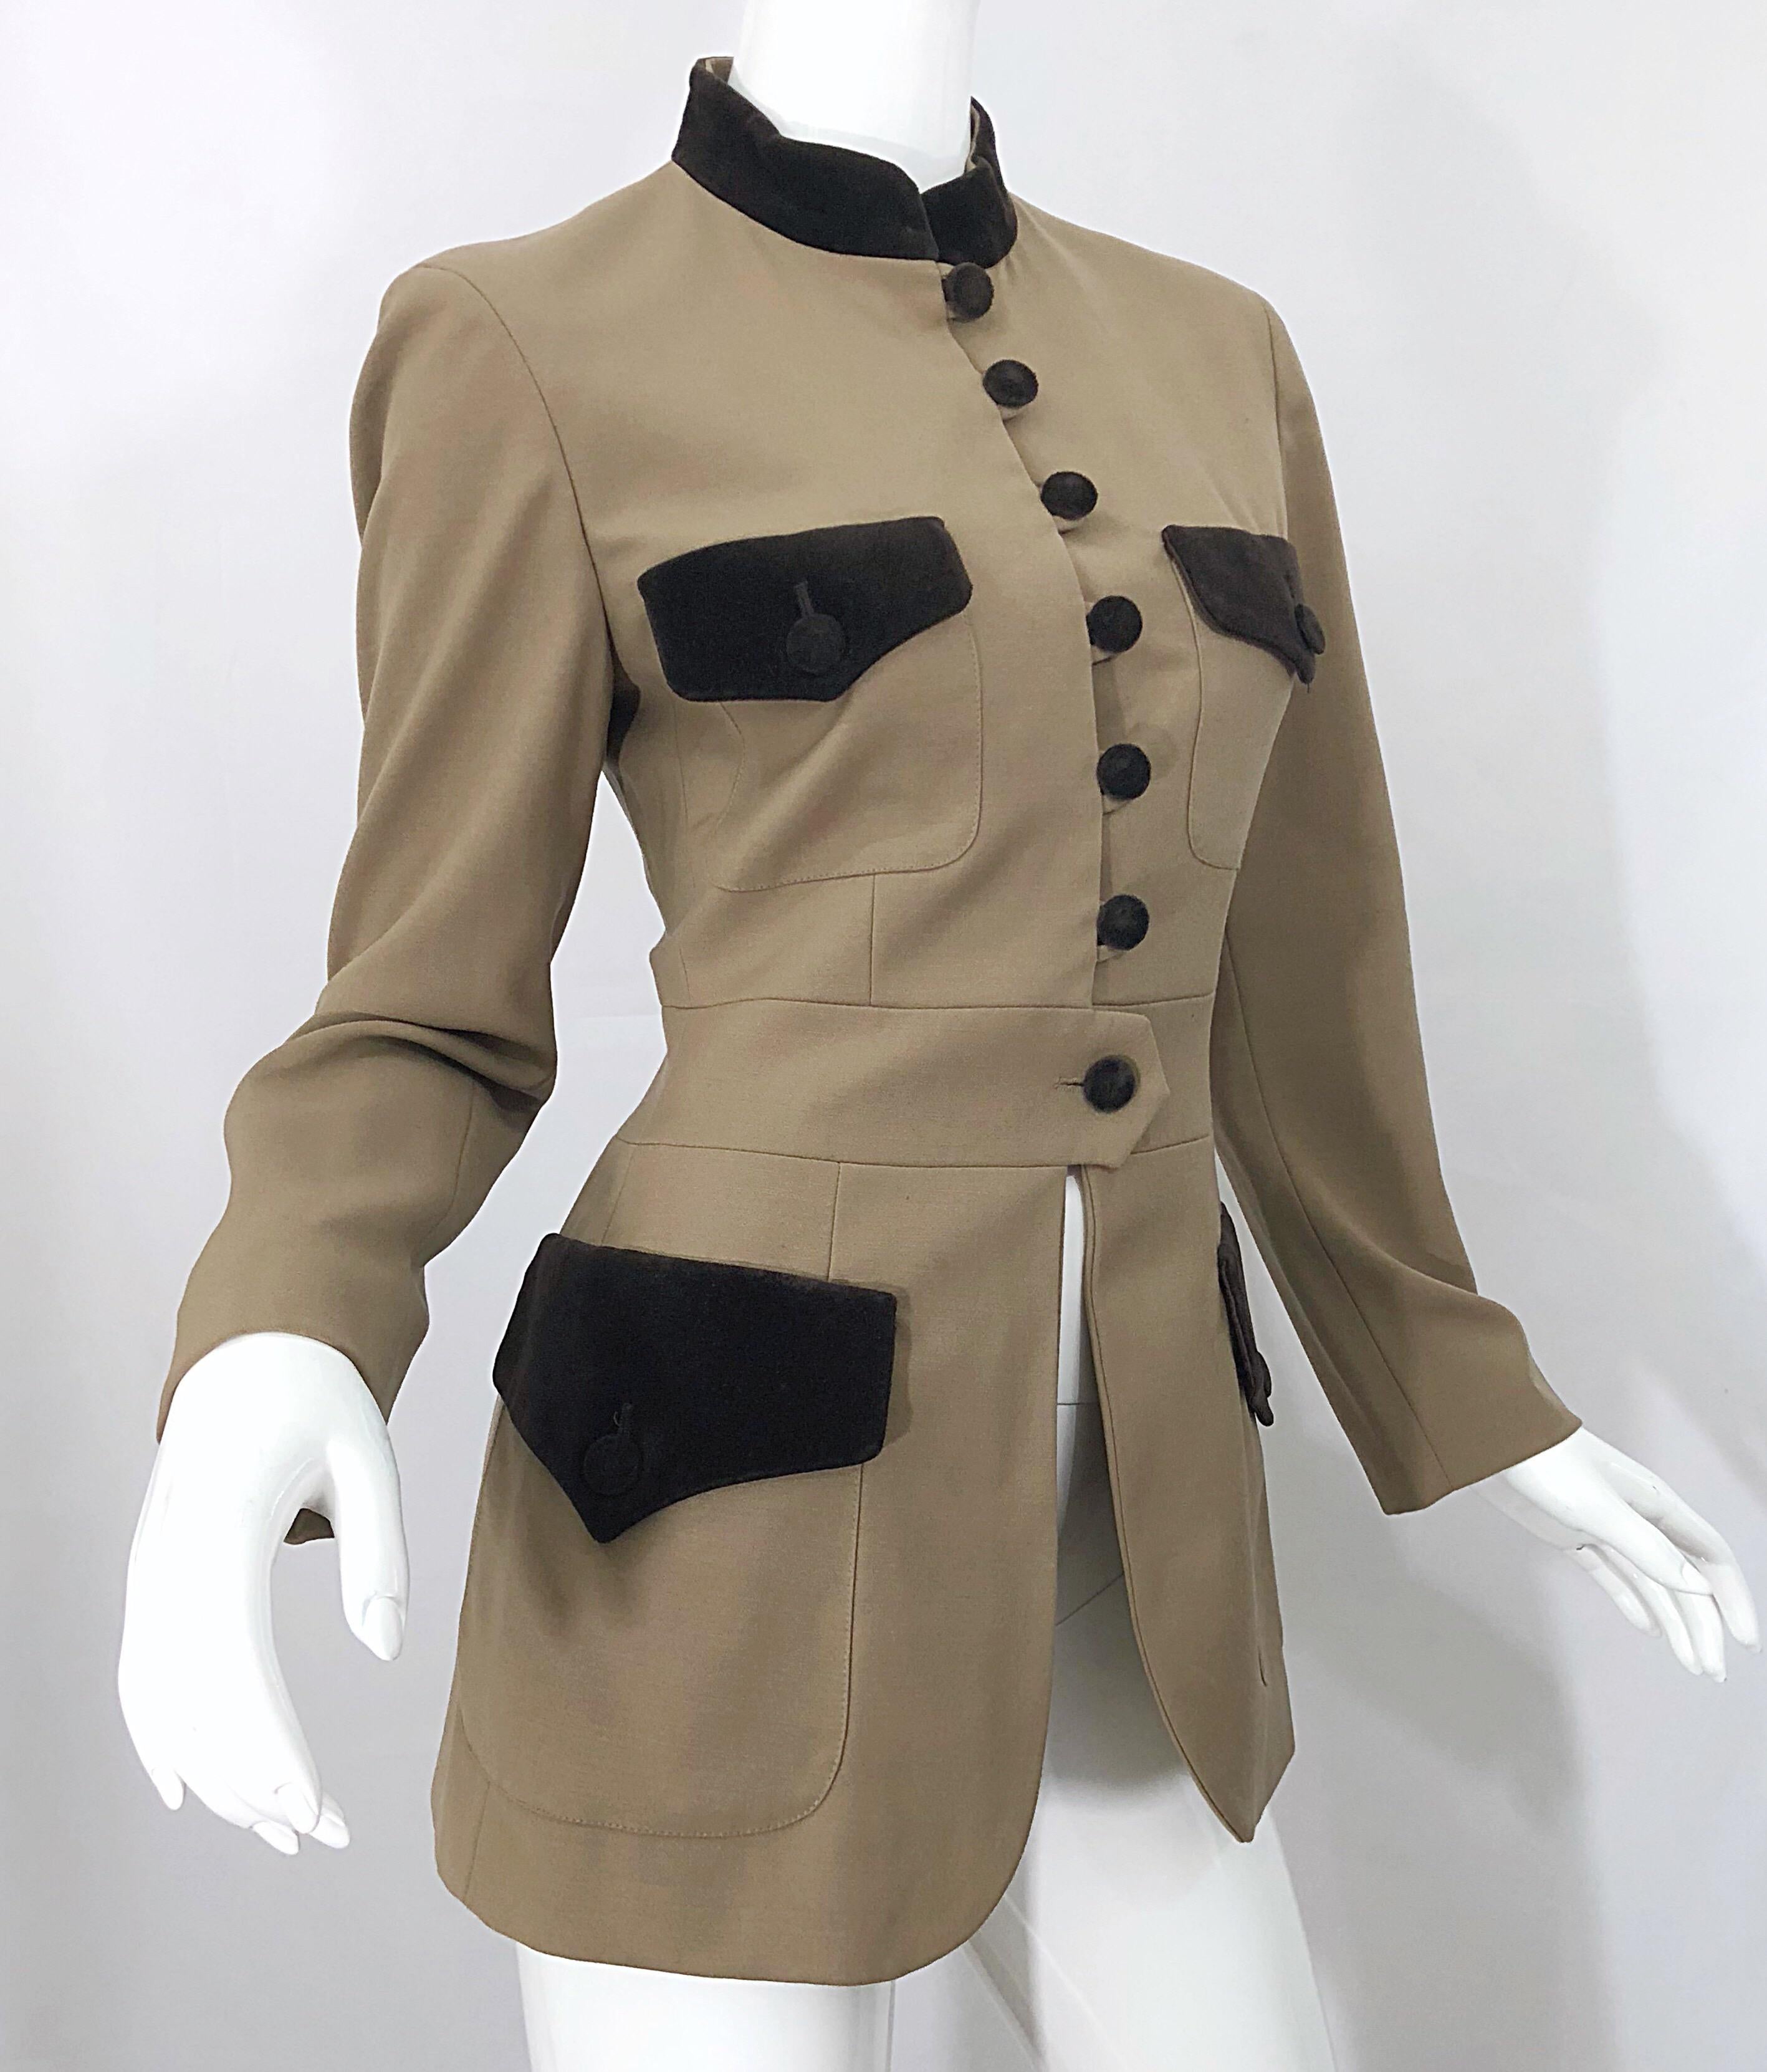 1990s Moschino Cheap & Chic Sz 8 Tan Brown Military Band Inspired Vintage Jacket For Sale 1